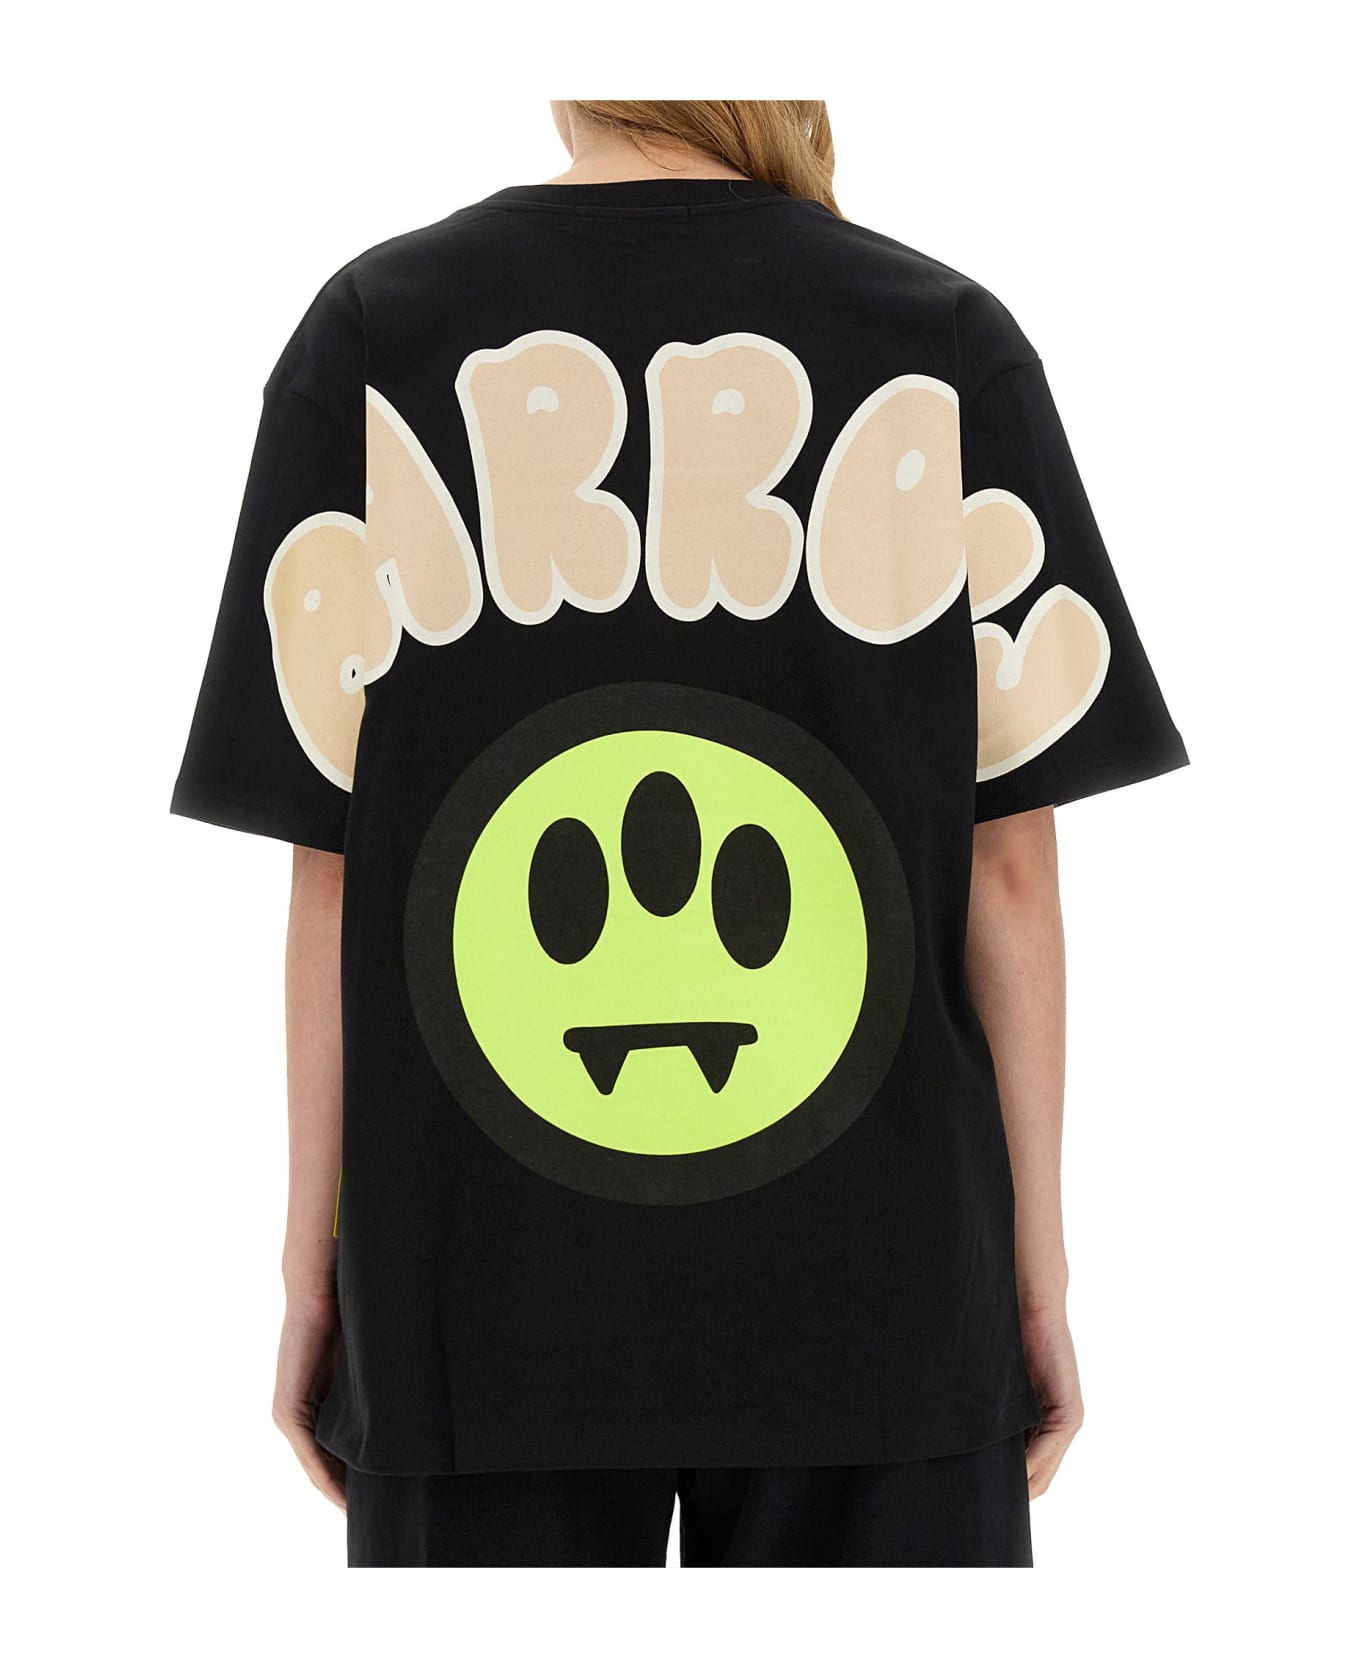 Barrow Black T-shirt With Front And Back Logo Print - Black Tシャツ